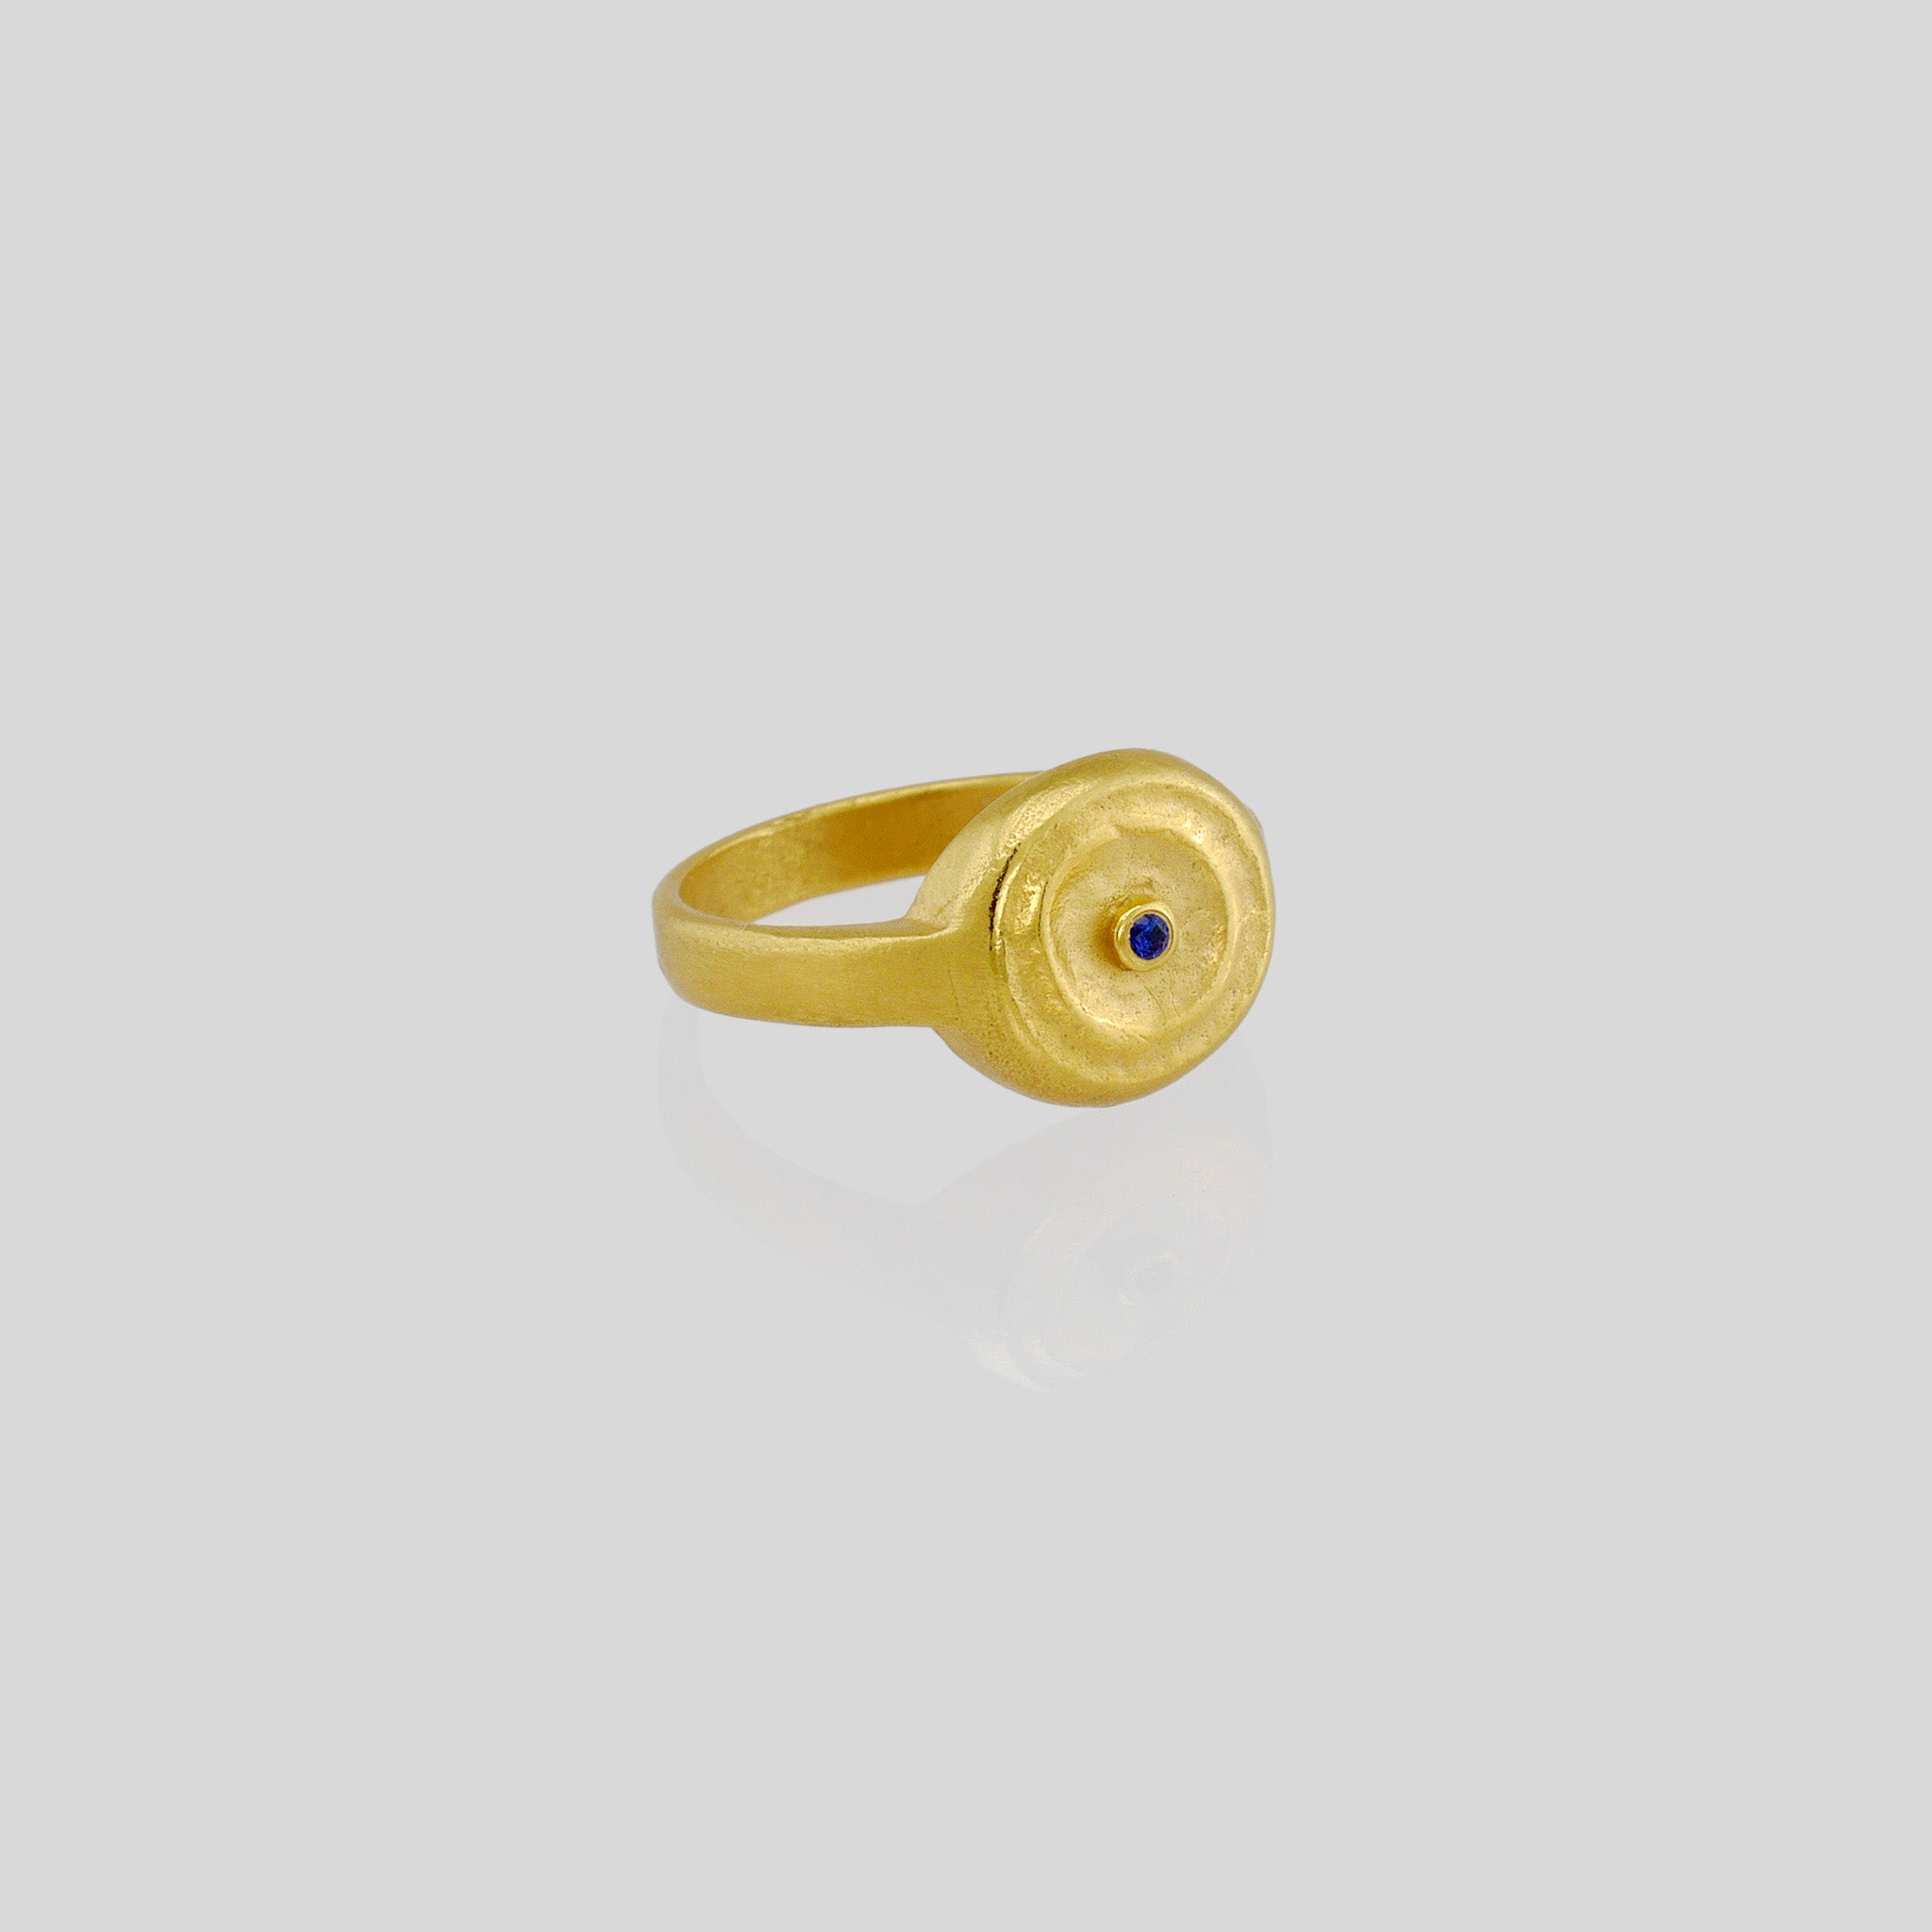 Handmade 18k Gold ring with a central Sapphire, exuding vintage charm reminiscent of the Egyptian pharaohs' era.